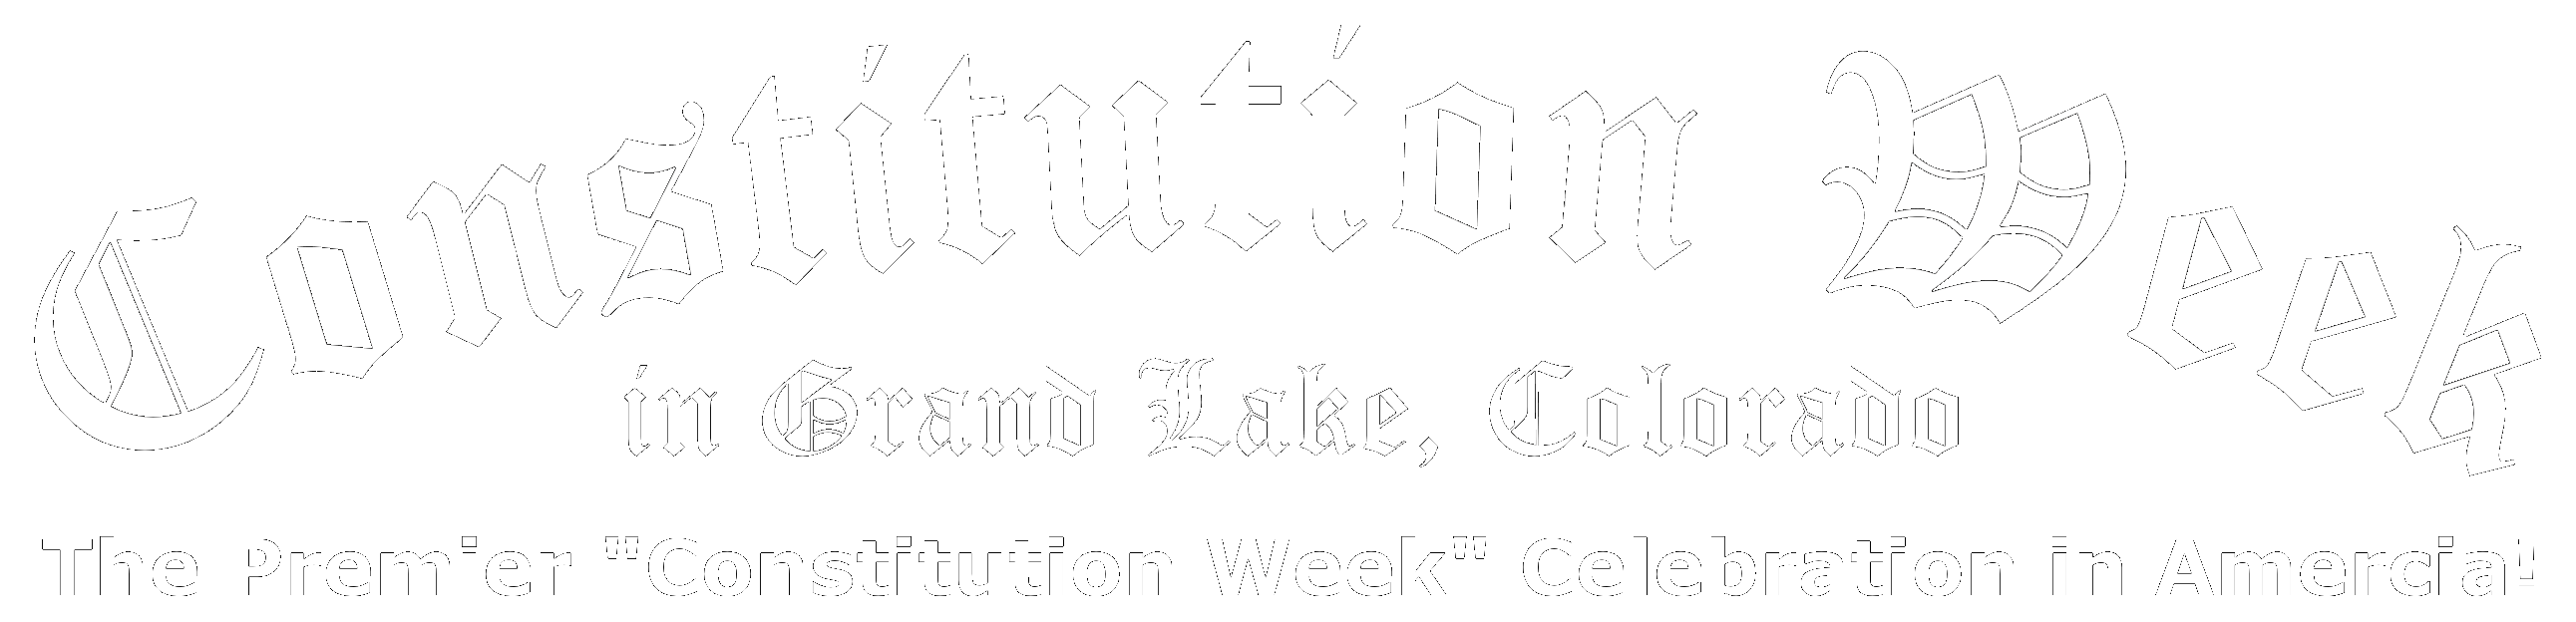 Constitution Week in Grand Lake, Colorado /  these words are masked against a blue background.